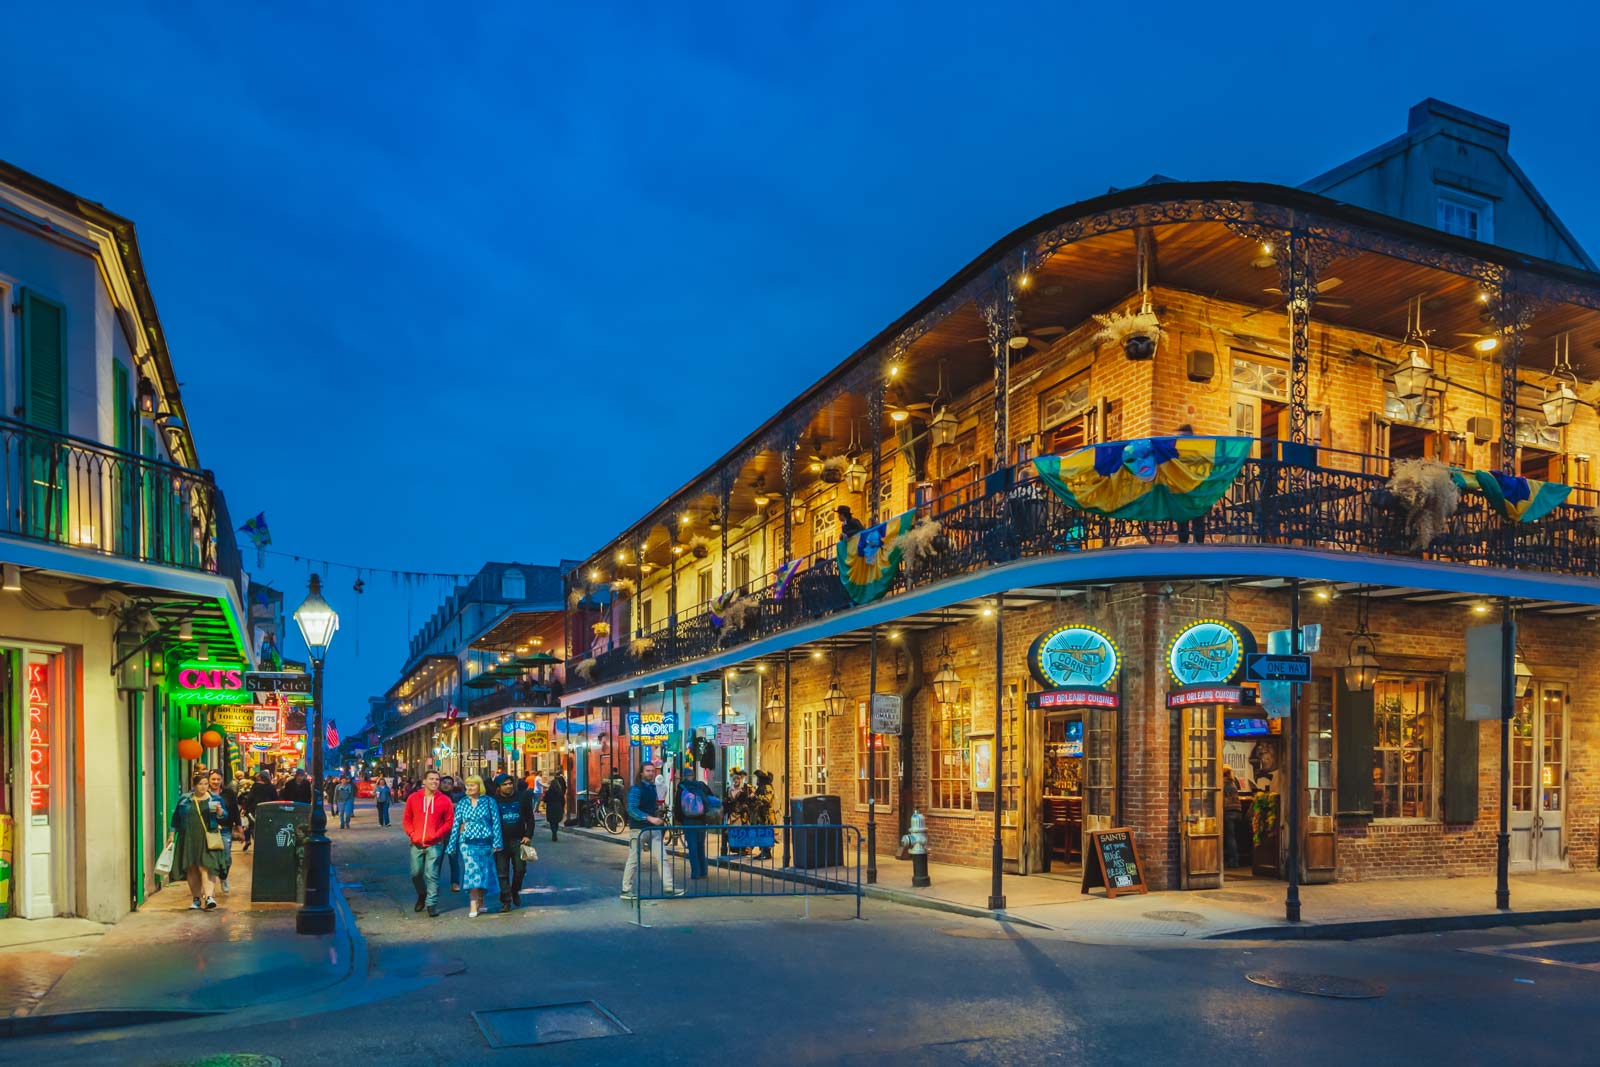 The French Quarter in New Orleans.